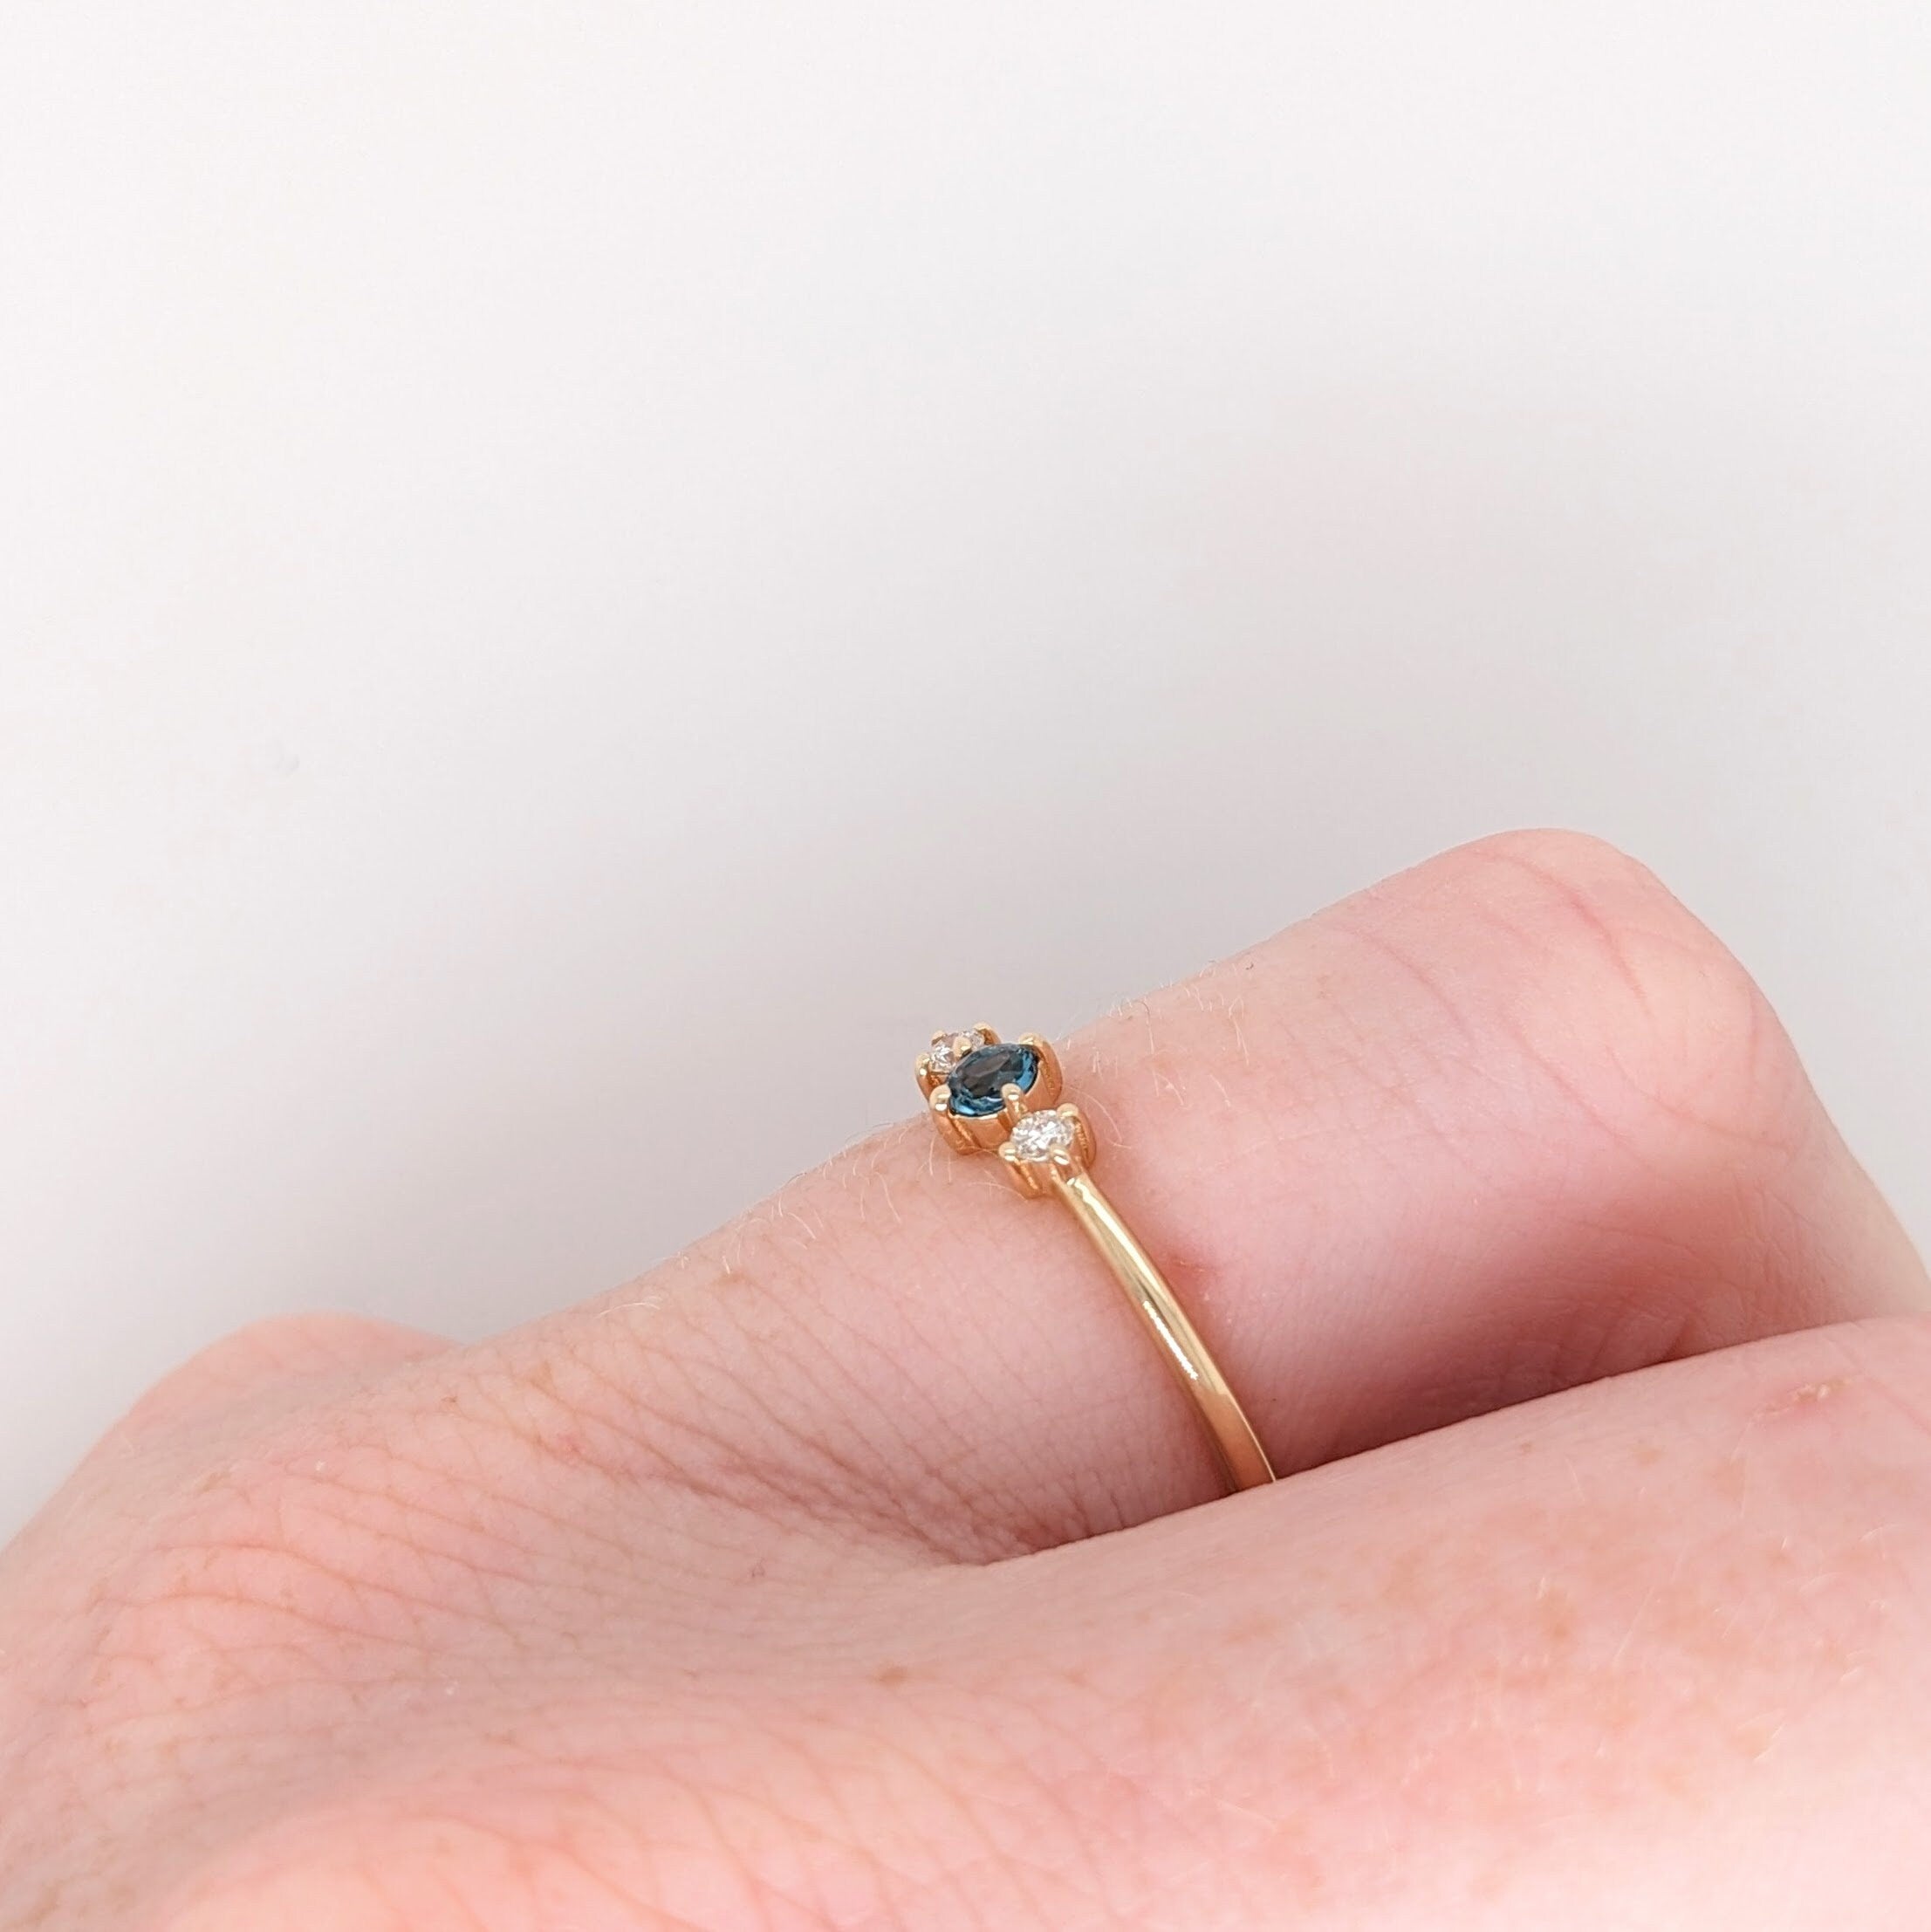 Dainty London Blue Topaz Ring in Solid 14K Yellow Gold w Natural Diamond Accents | Round 3mm | December Birthstone | Daily Wear 